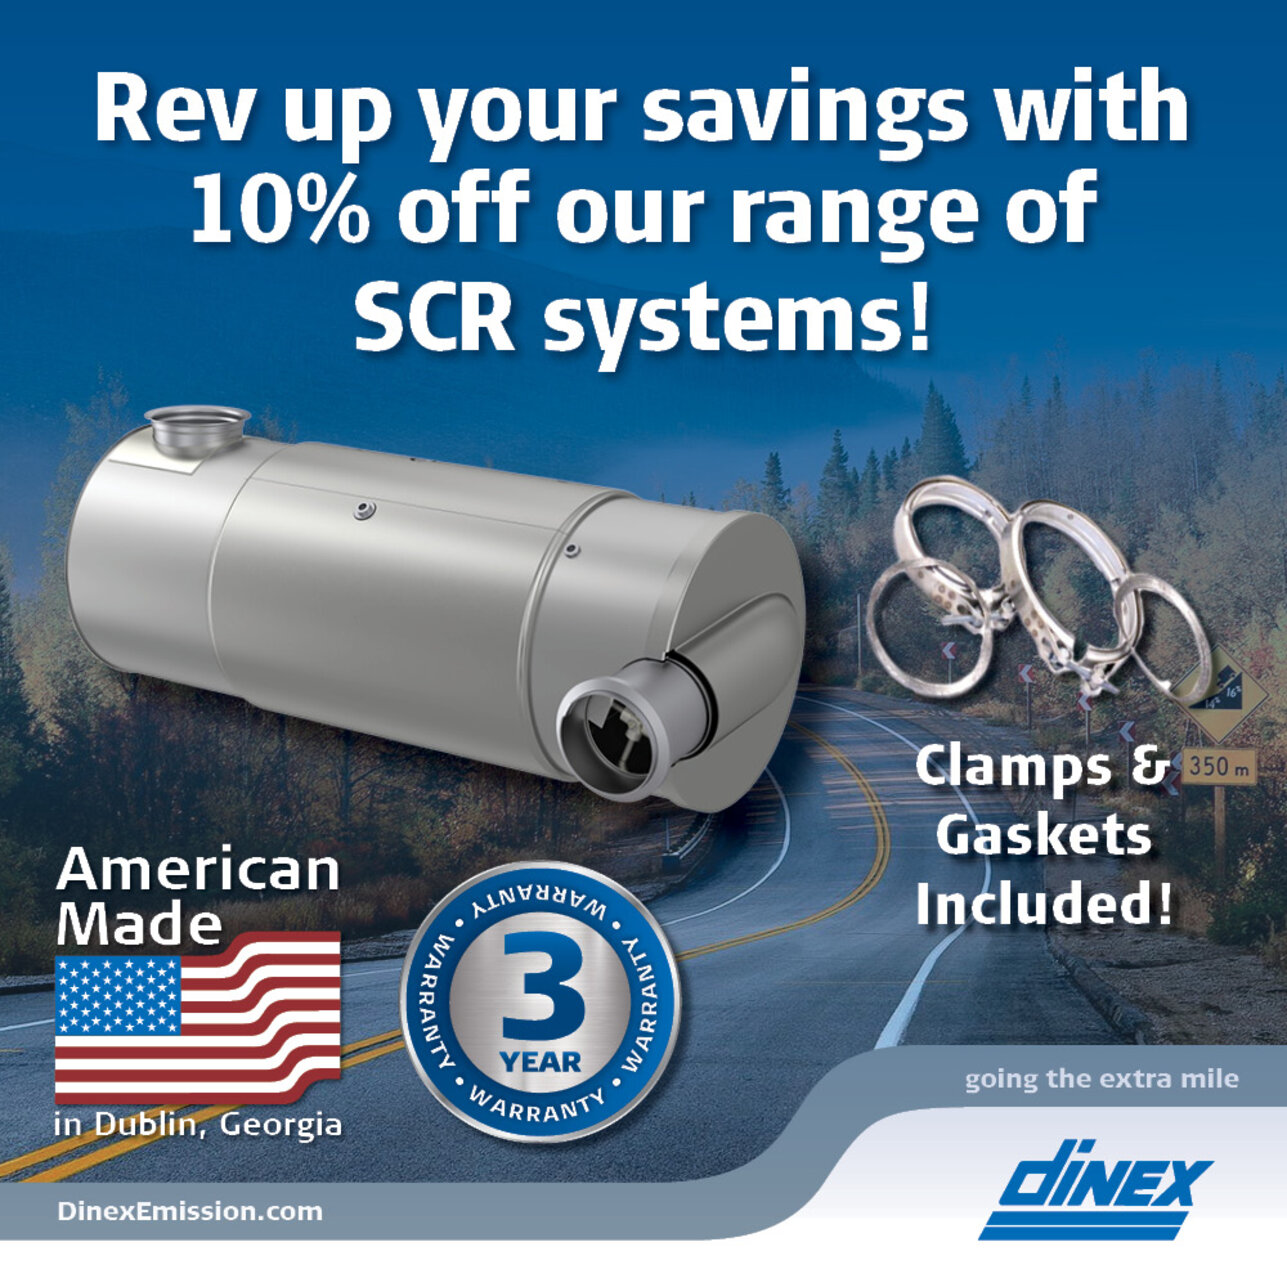 Savings on Dinex SCR systems - US aftermarket